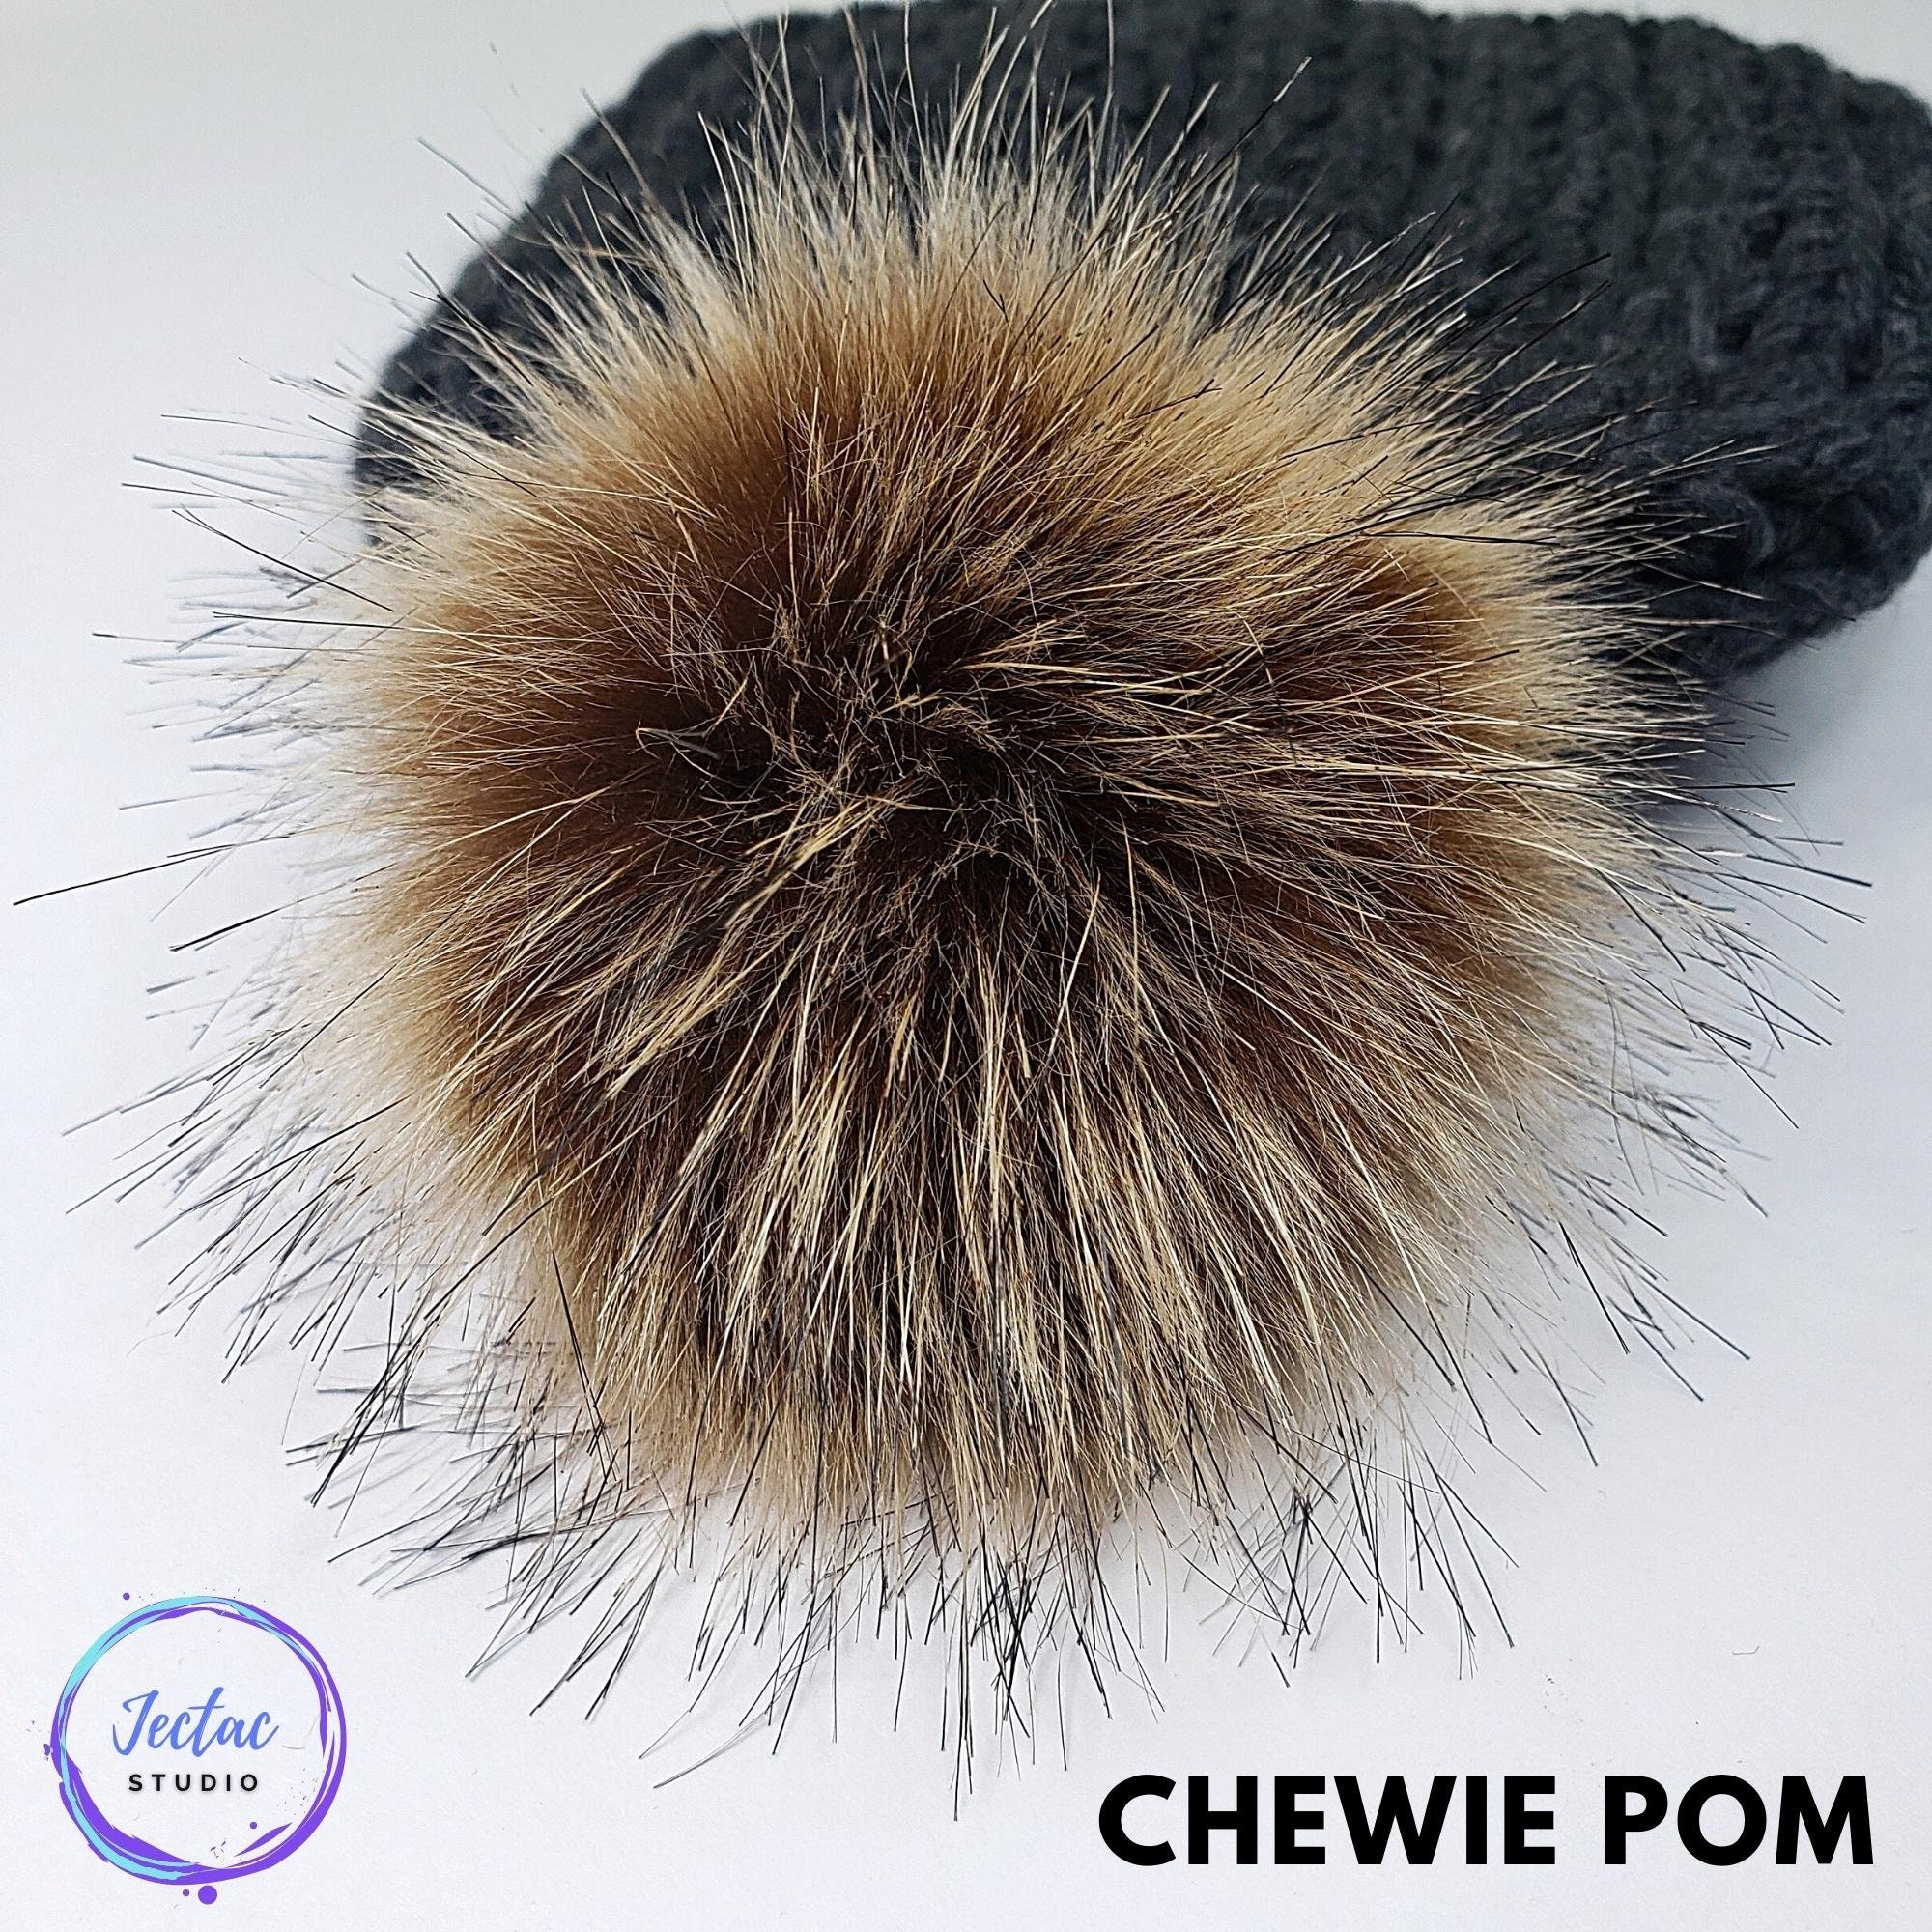 Dark Navy Blue Faux Fur Pom Poms for Knitted Hats Beanies Crafts or Key  Chains 4 Inch Fake Fur Pom Pon With Snap Button, Loop or Tie Strings 